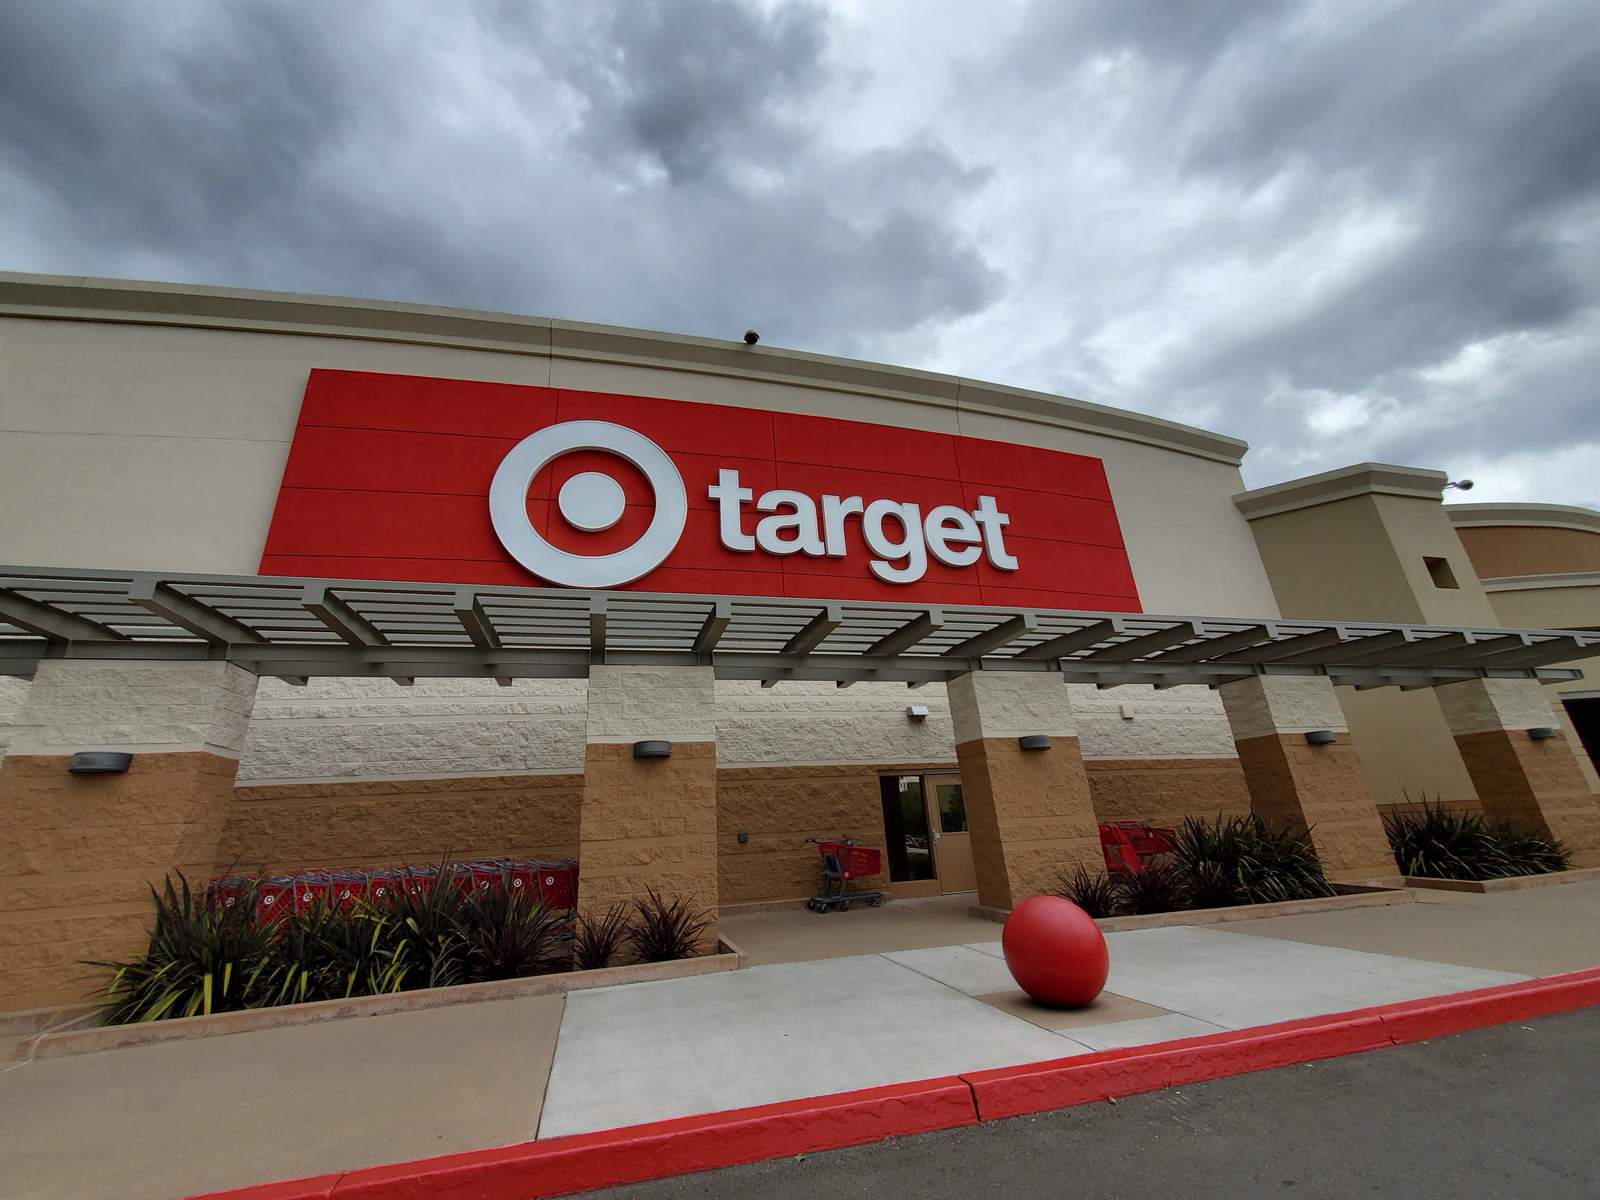 Here’s how you can trade an old car seat to get new one 20% off at Target